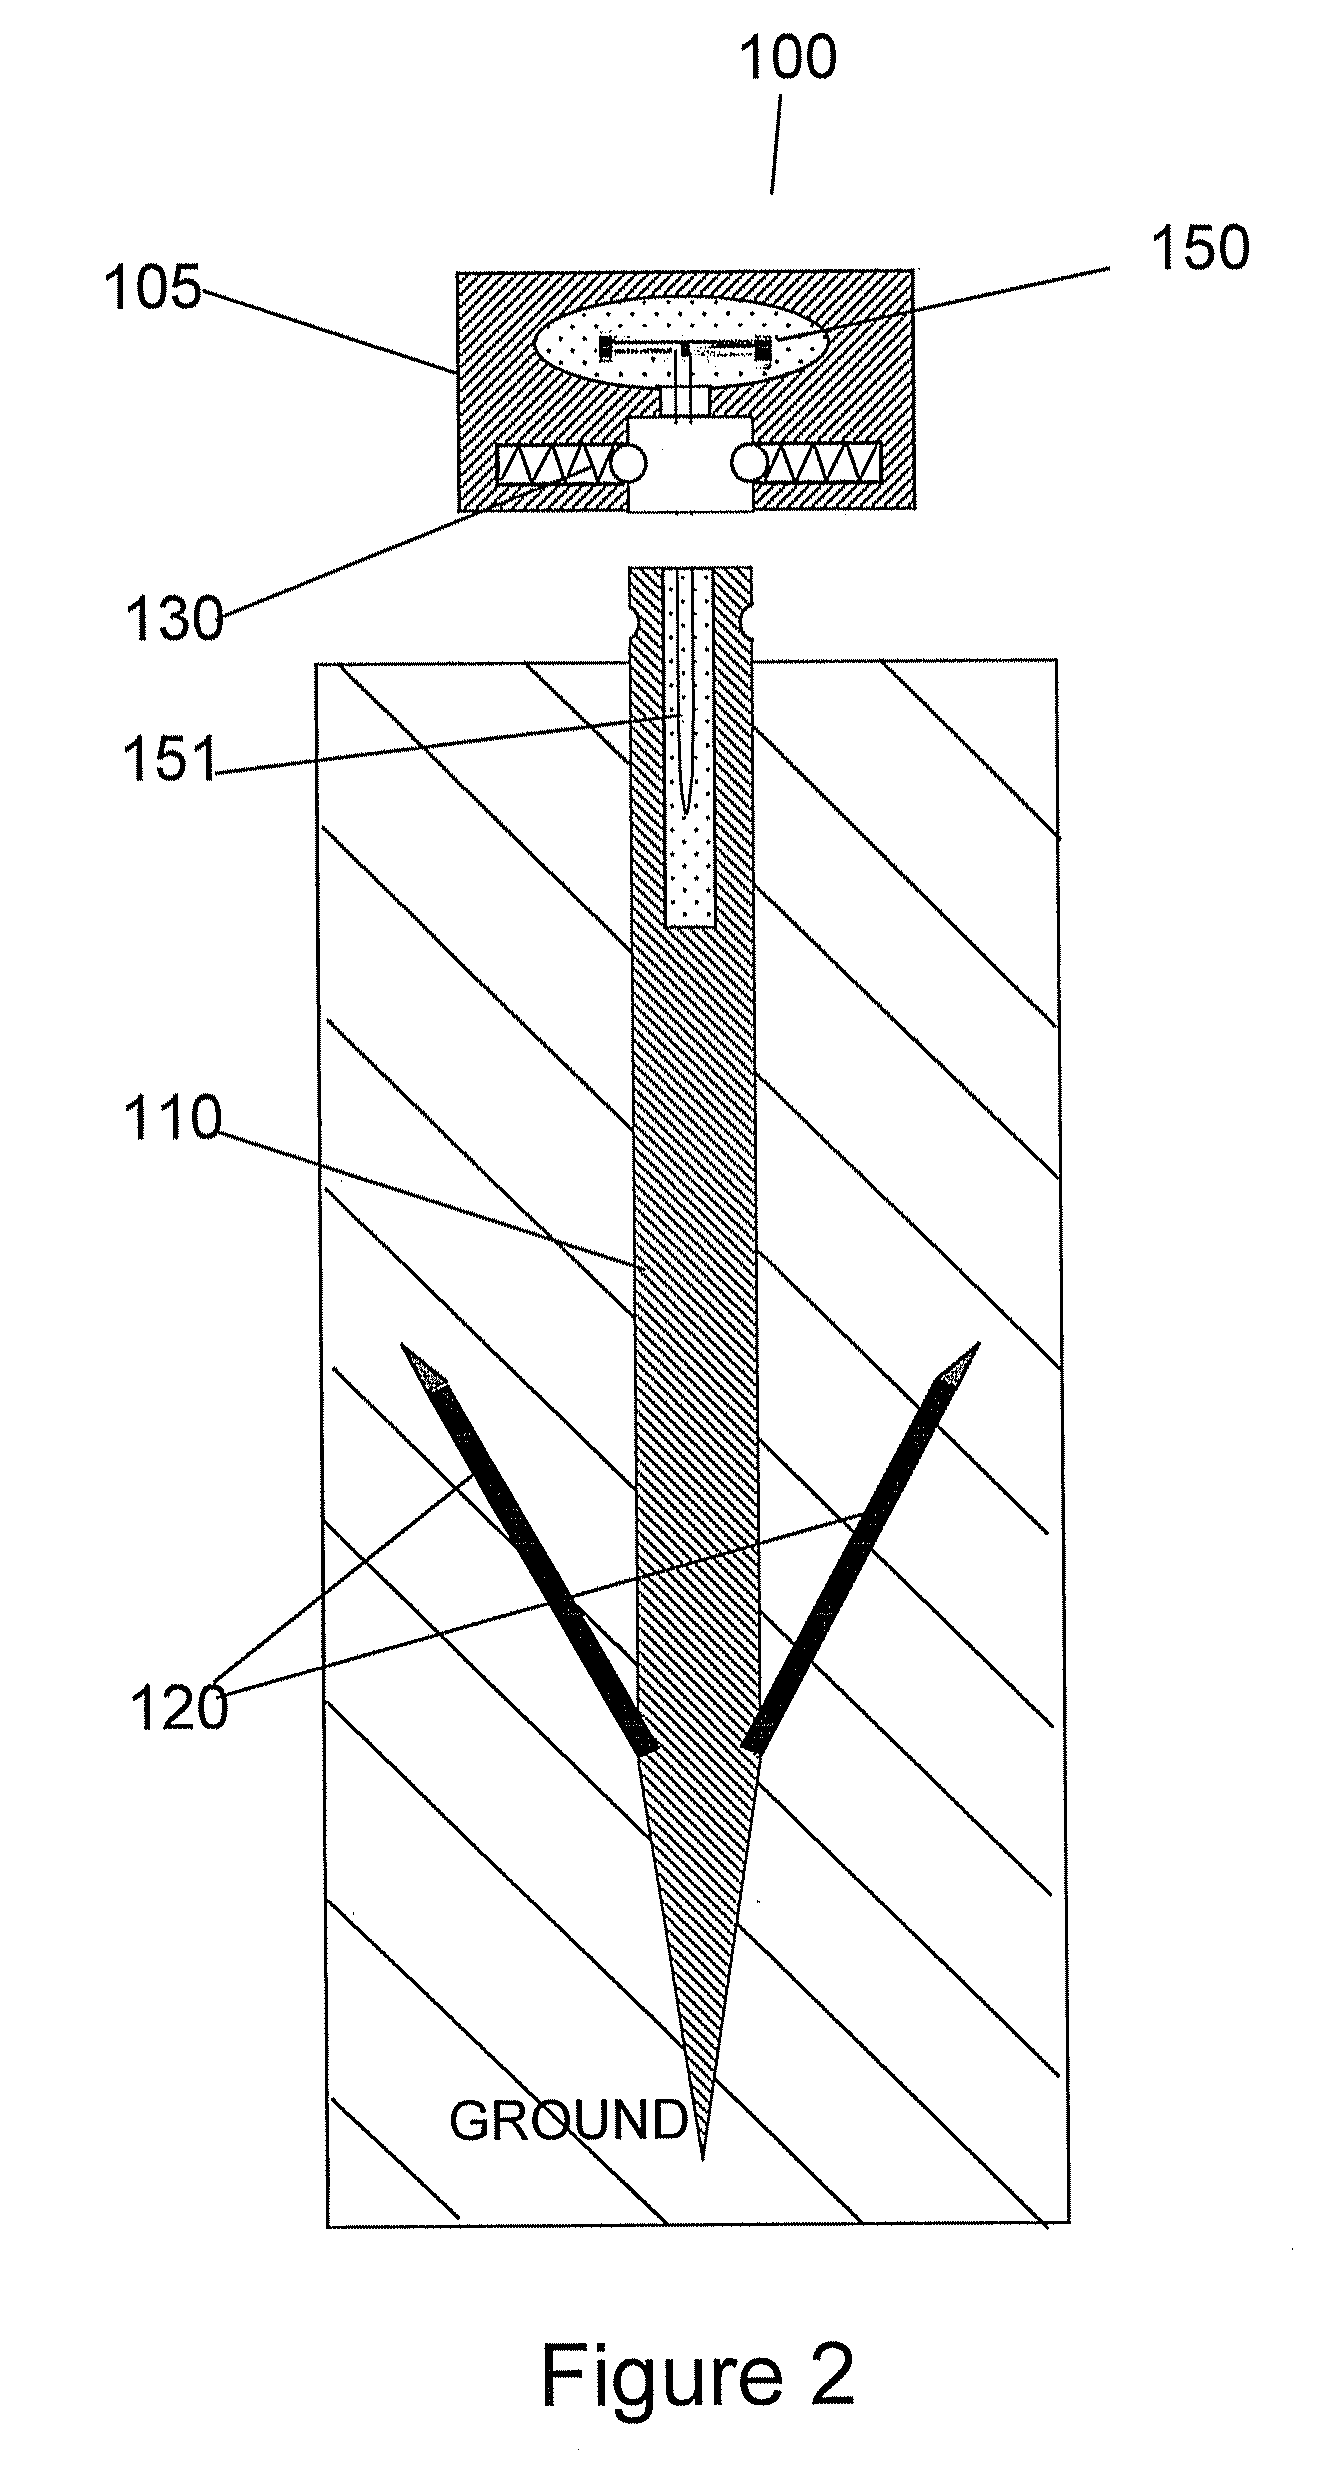 Apparatus for securing a land surveyor's mark based on the use of a radio frequency identifier tag